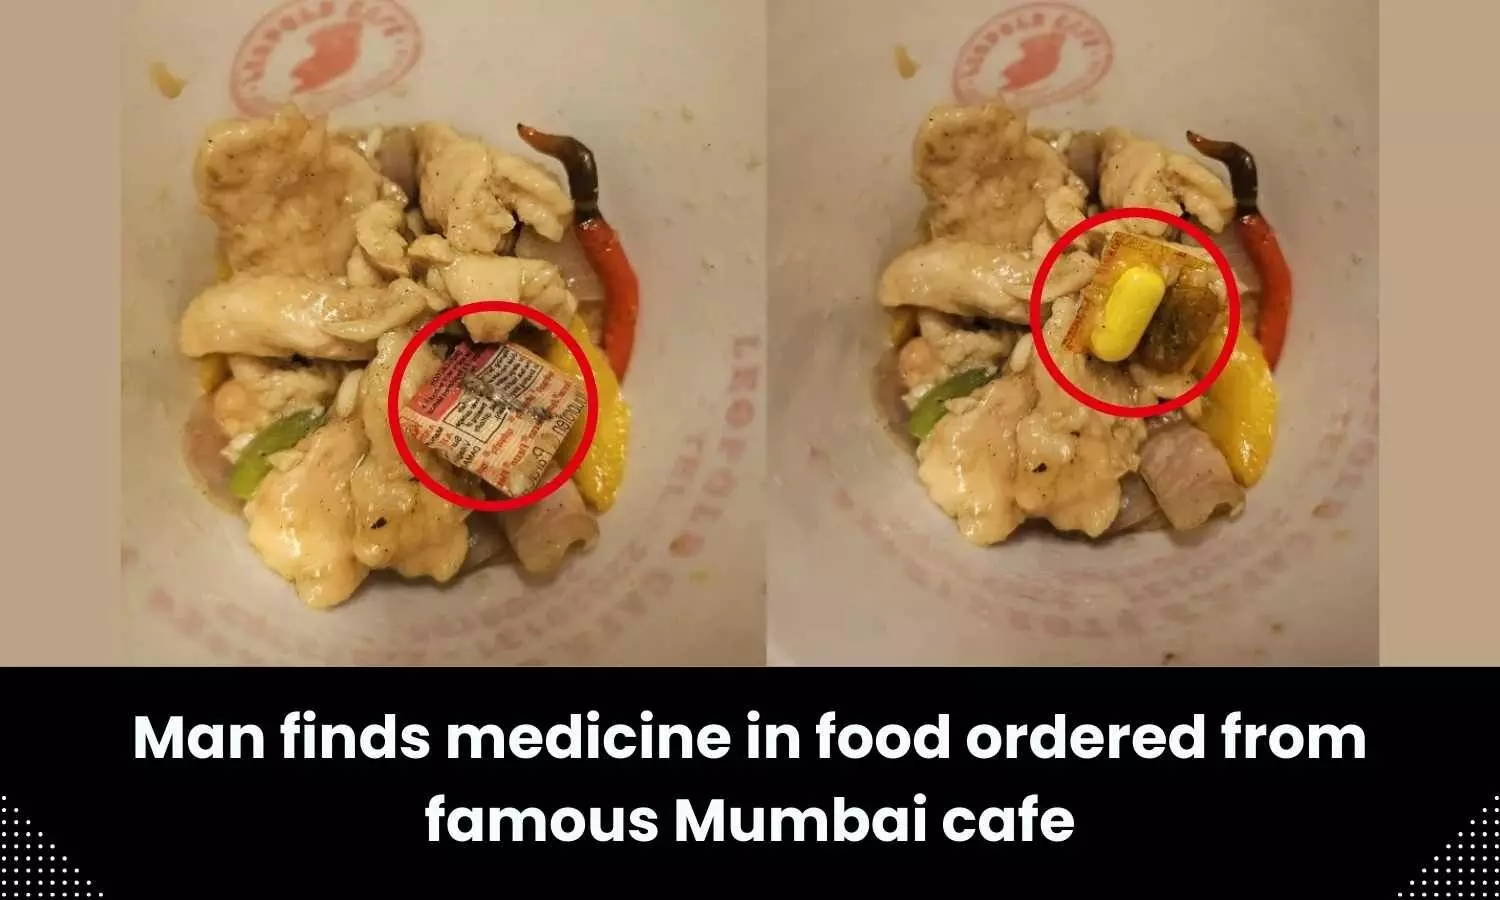 Man finds medicine in food ordered from Mumbai cafe